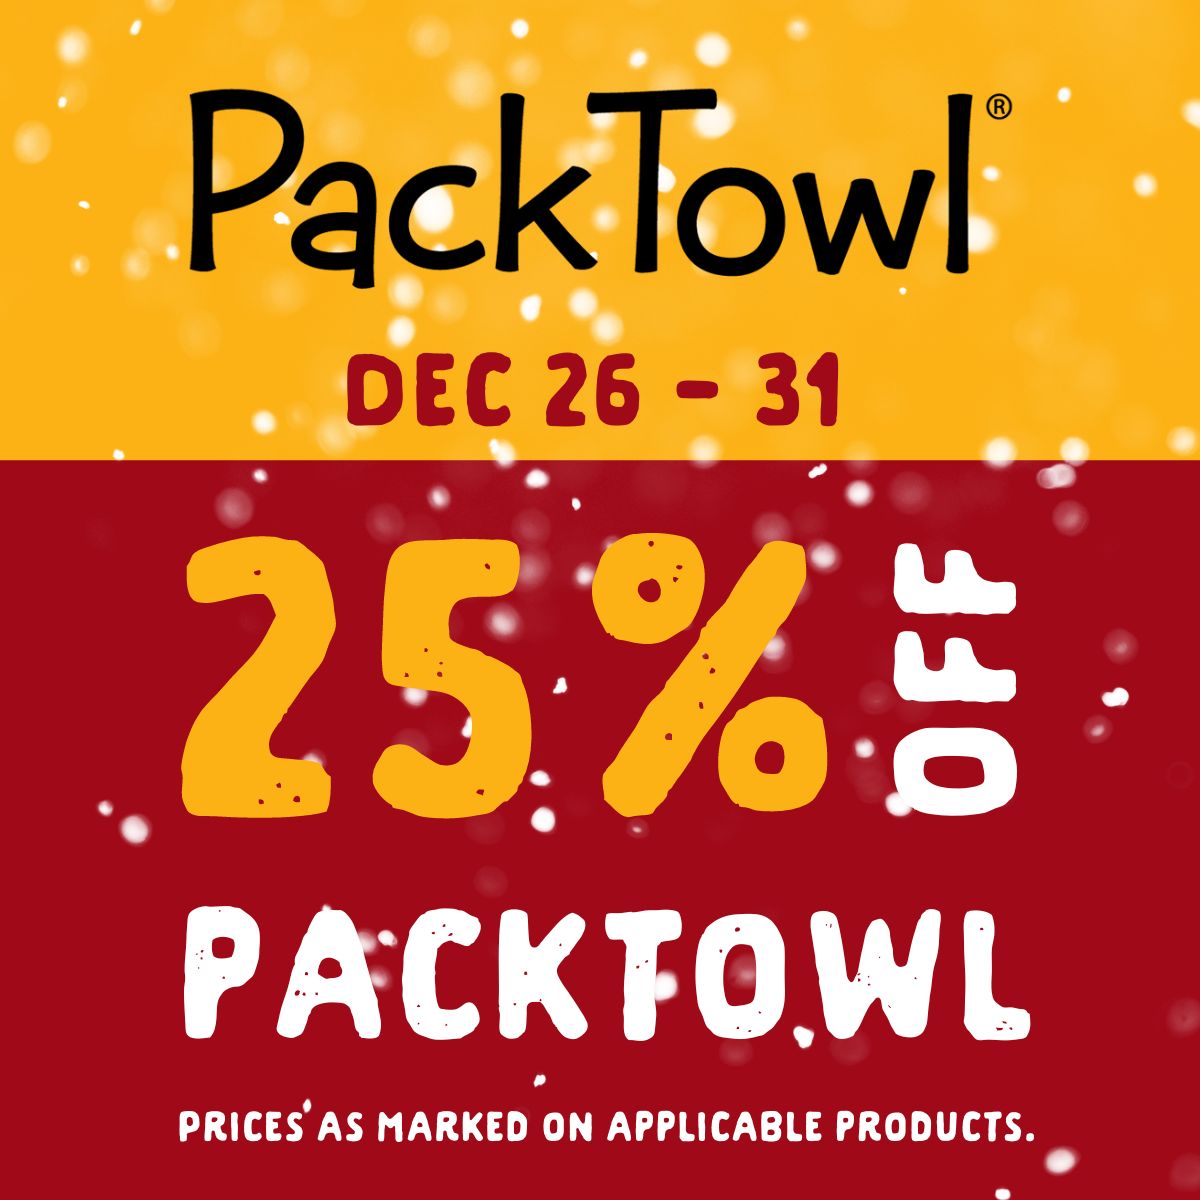 25% off Packtowl from December 26 to 31. Prices as marked on applicable products.